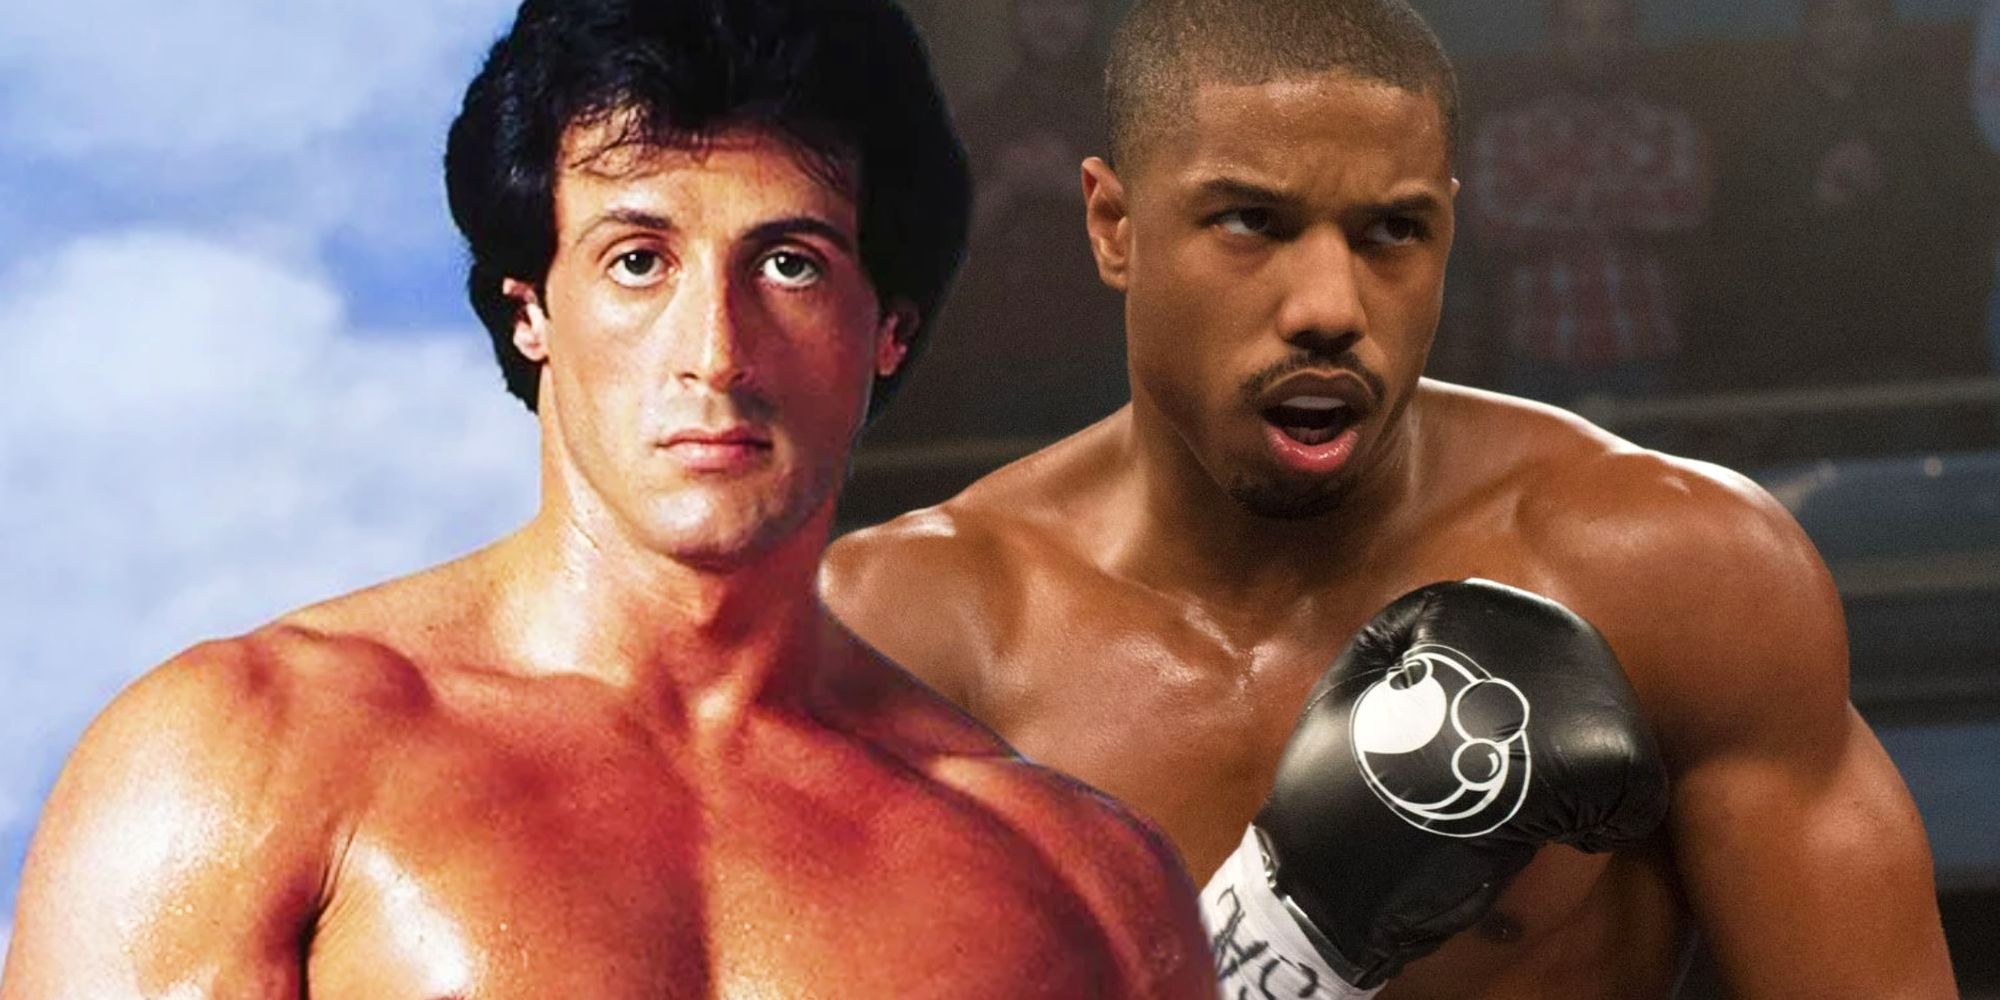 Sylvester Stallone as Rocky and Michael B Jordan as Creed